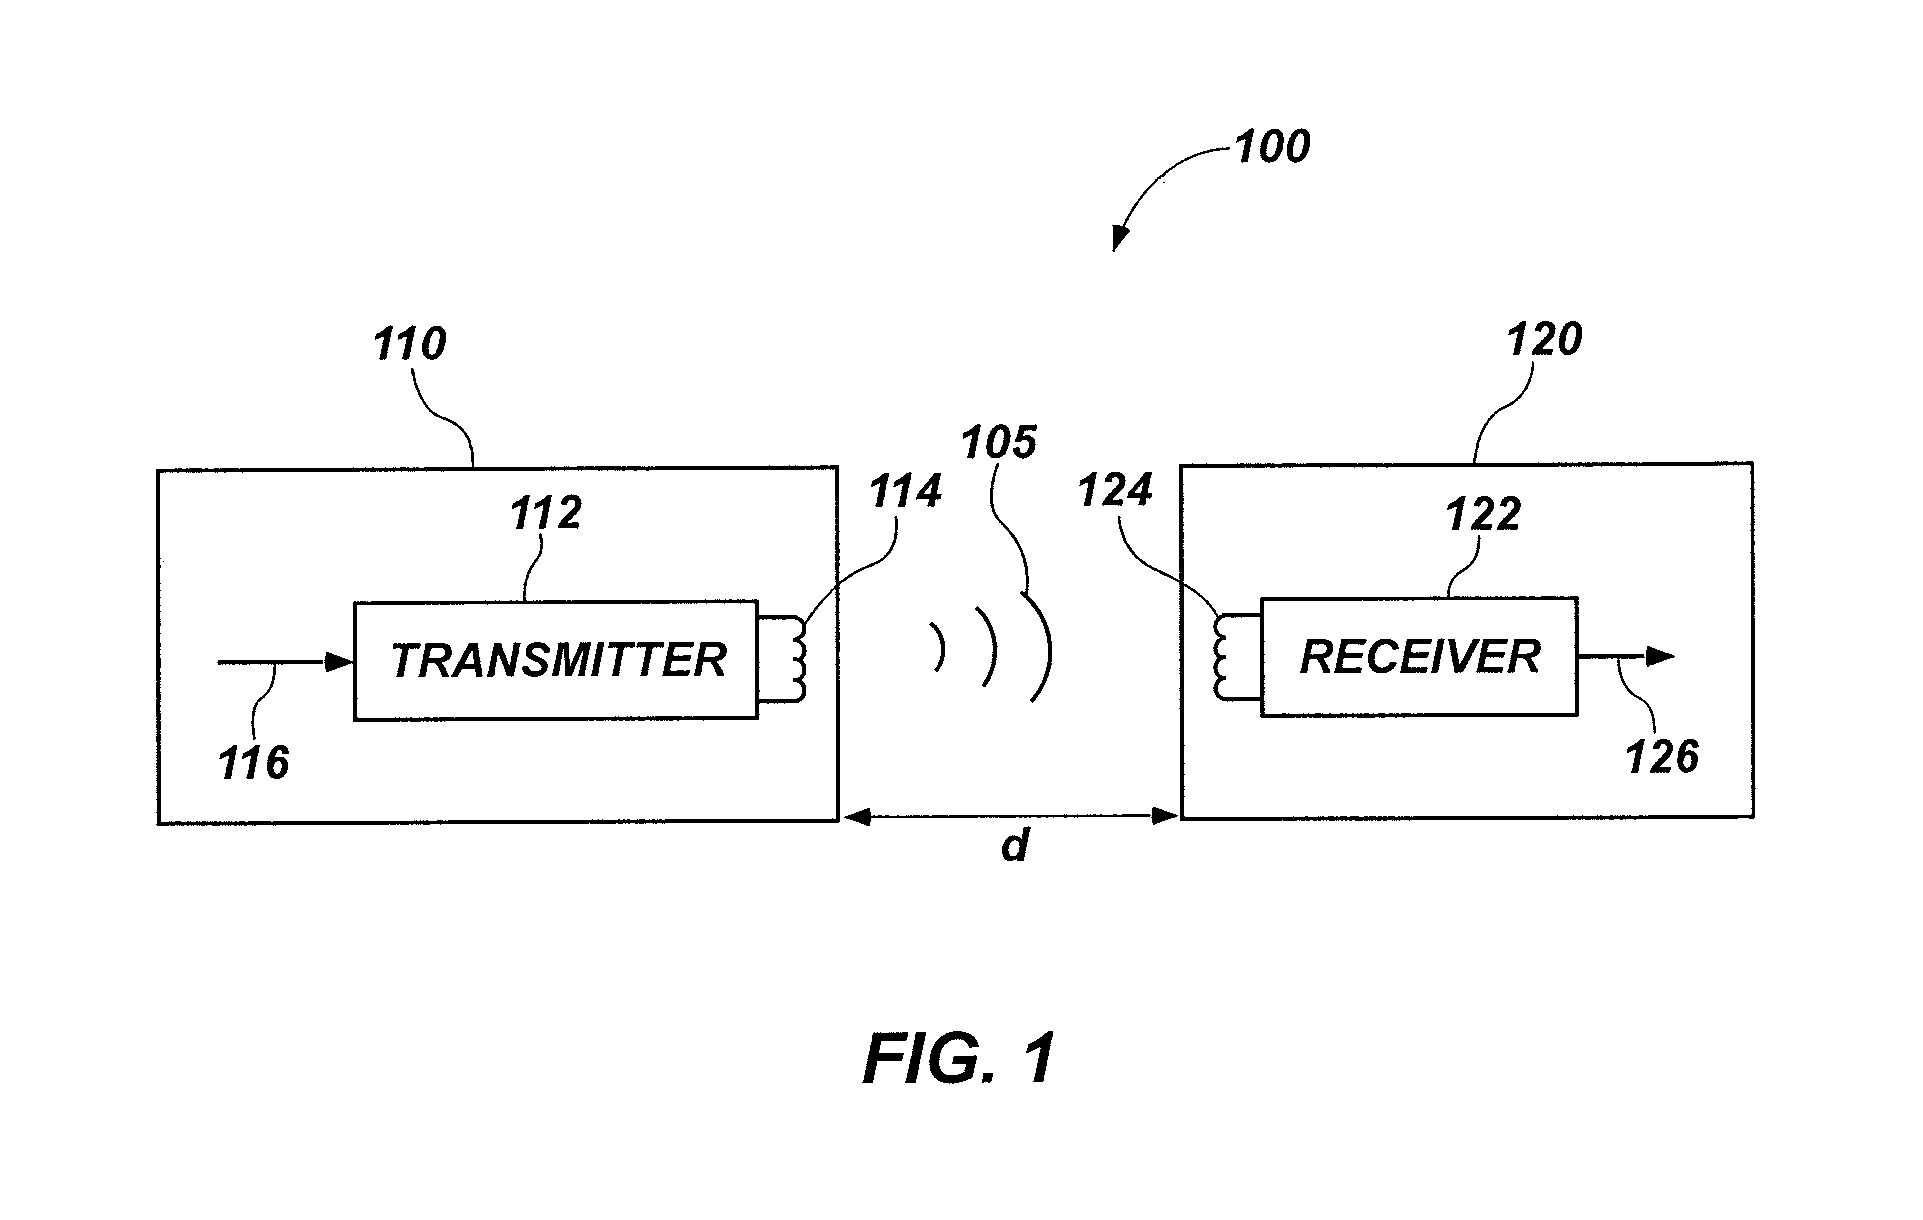 Apparatuses and related methods for modulating power of a wireless power receiver